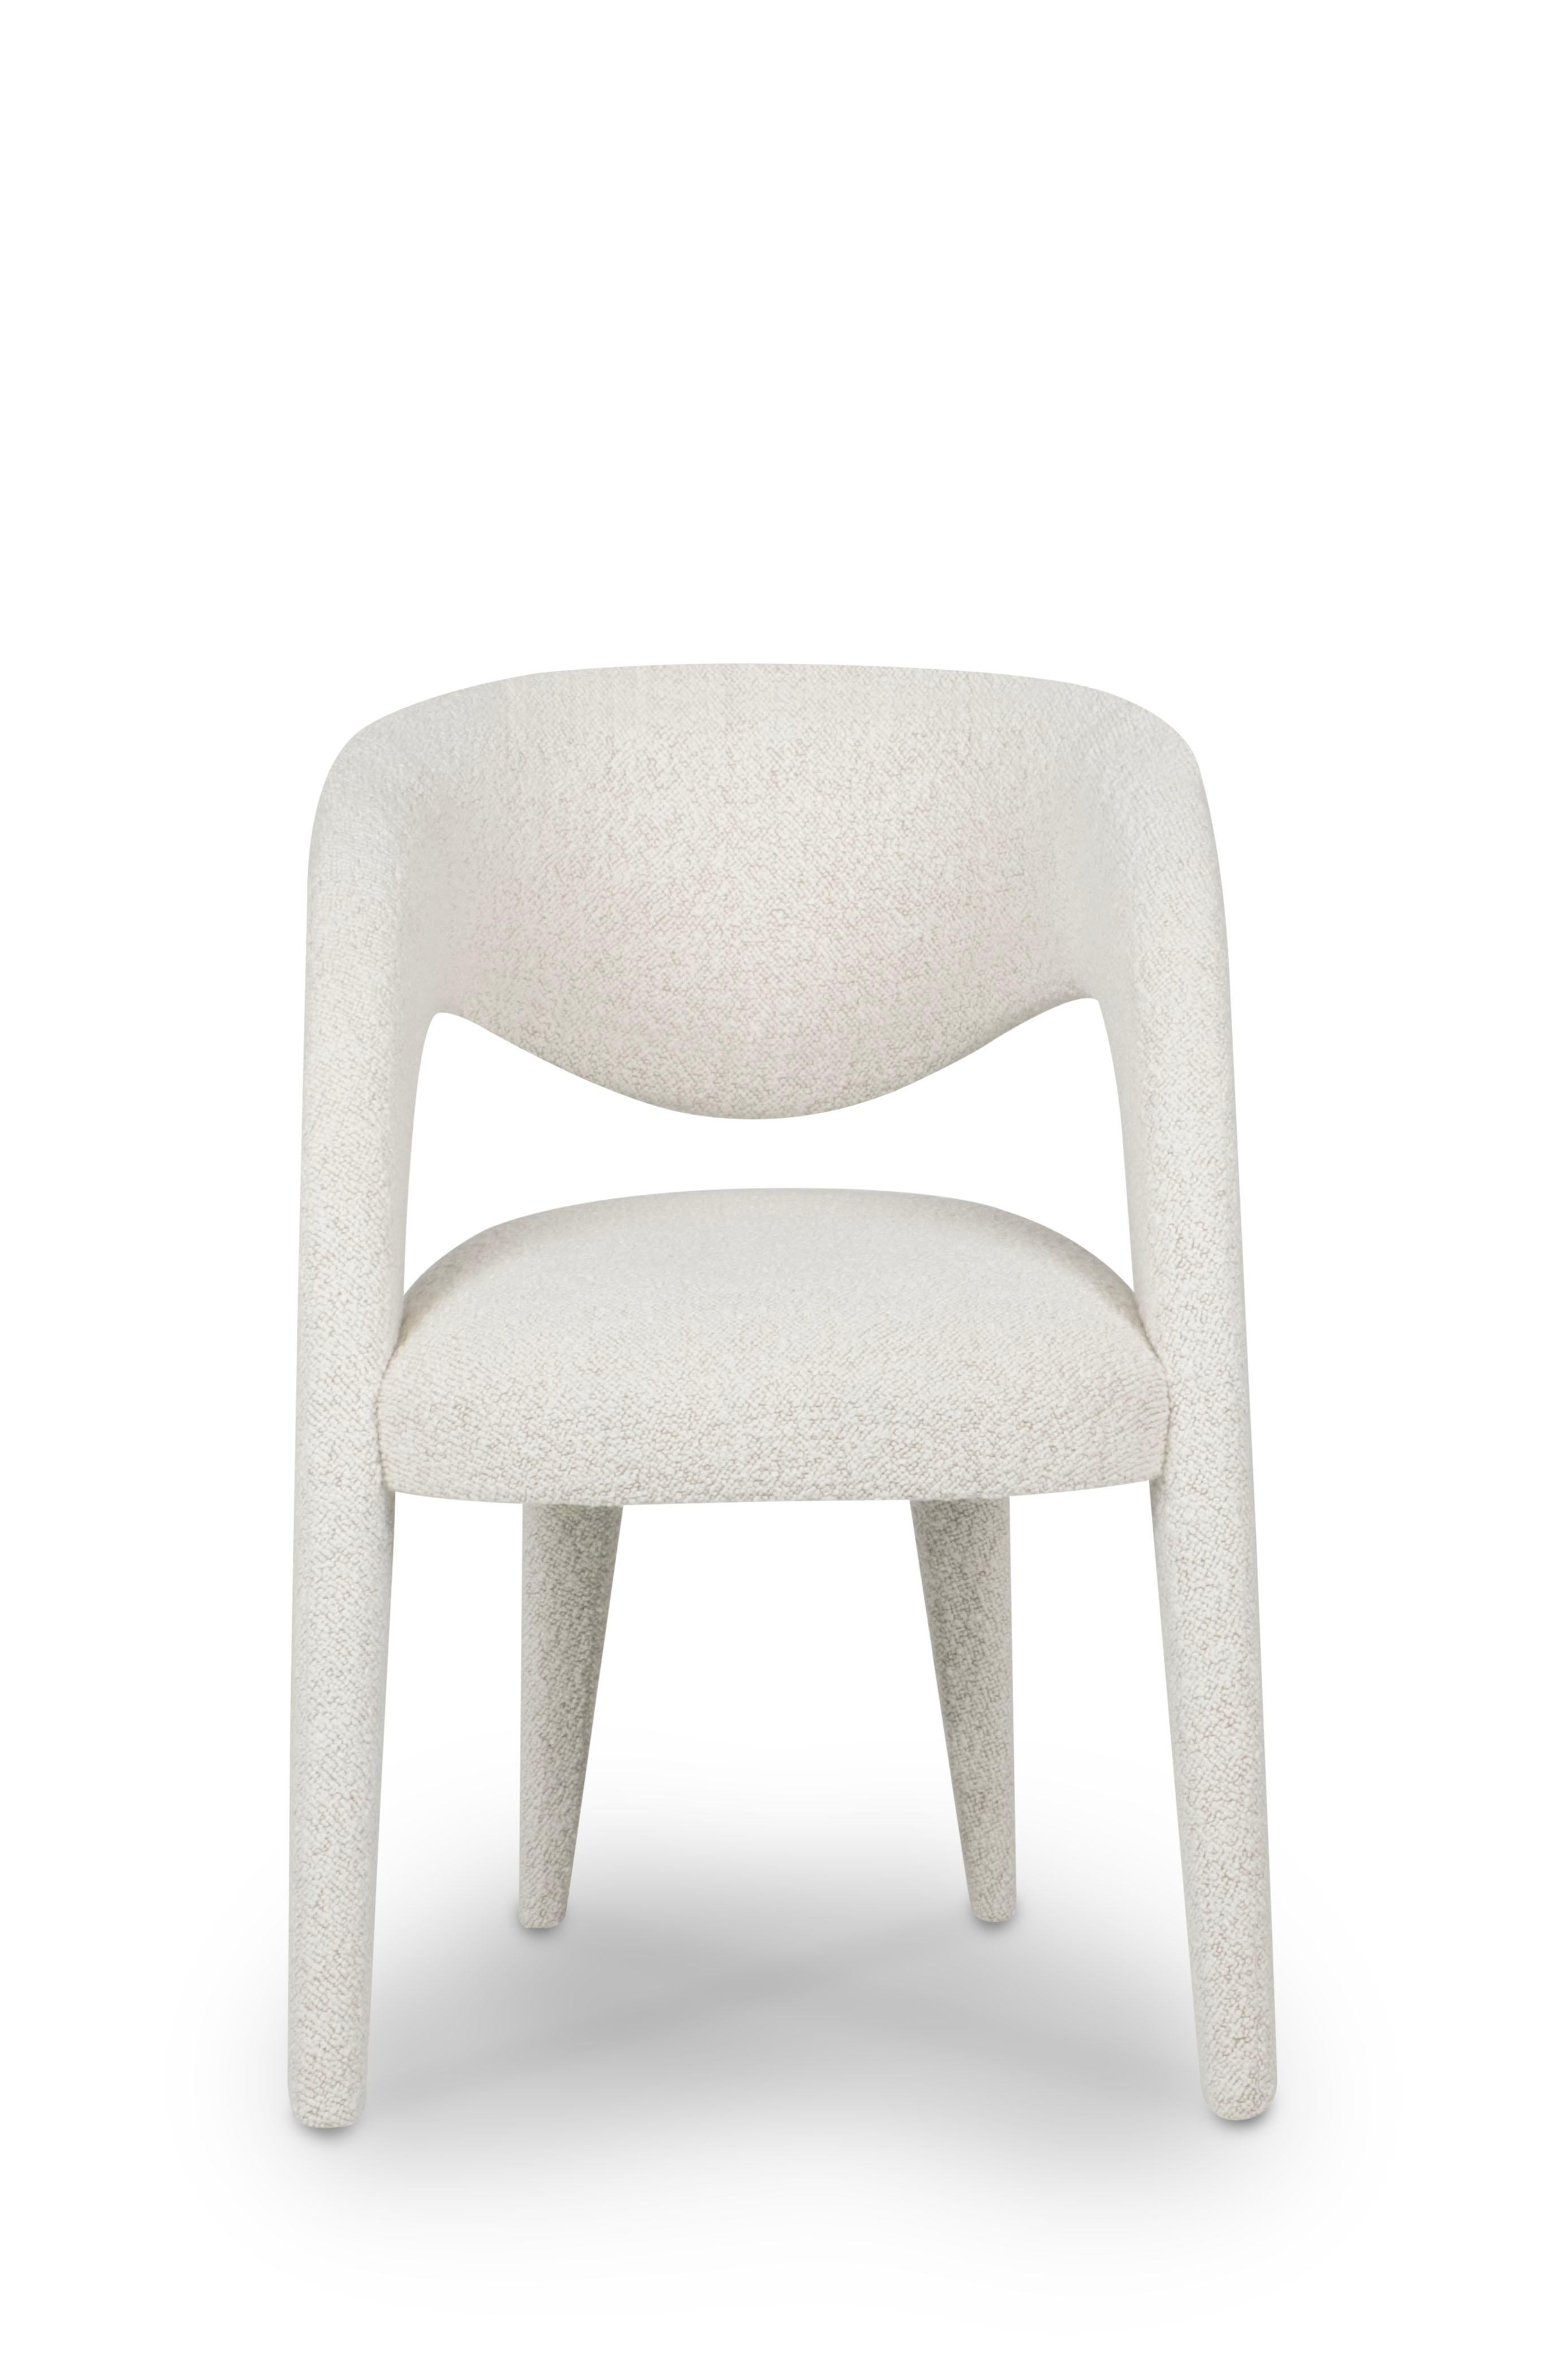 Modern Laurence Dining Chairs, DEDAR Bouclé, Handmade in Portugal by Greenapple For Sale 9